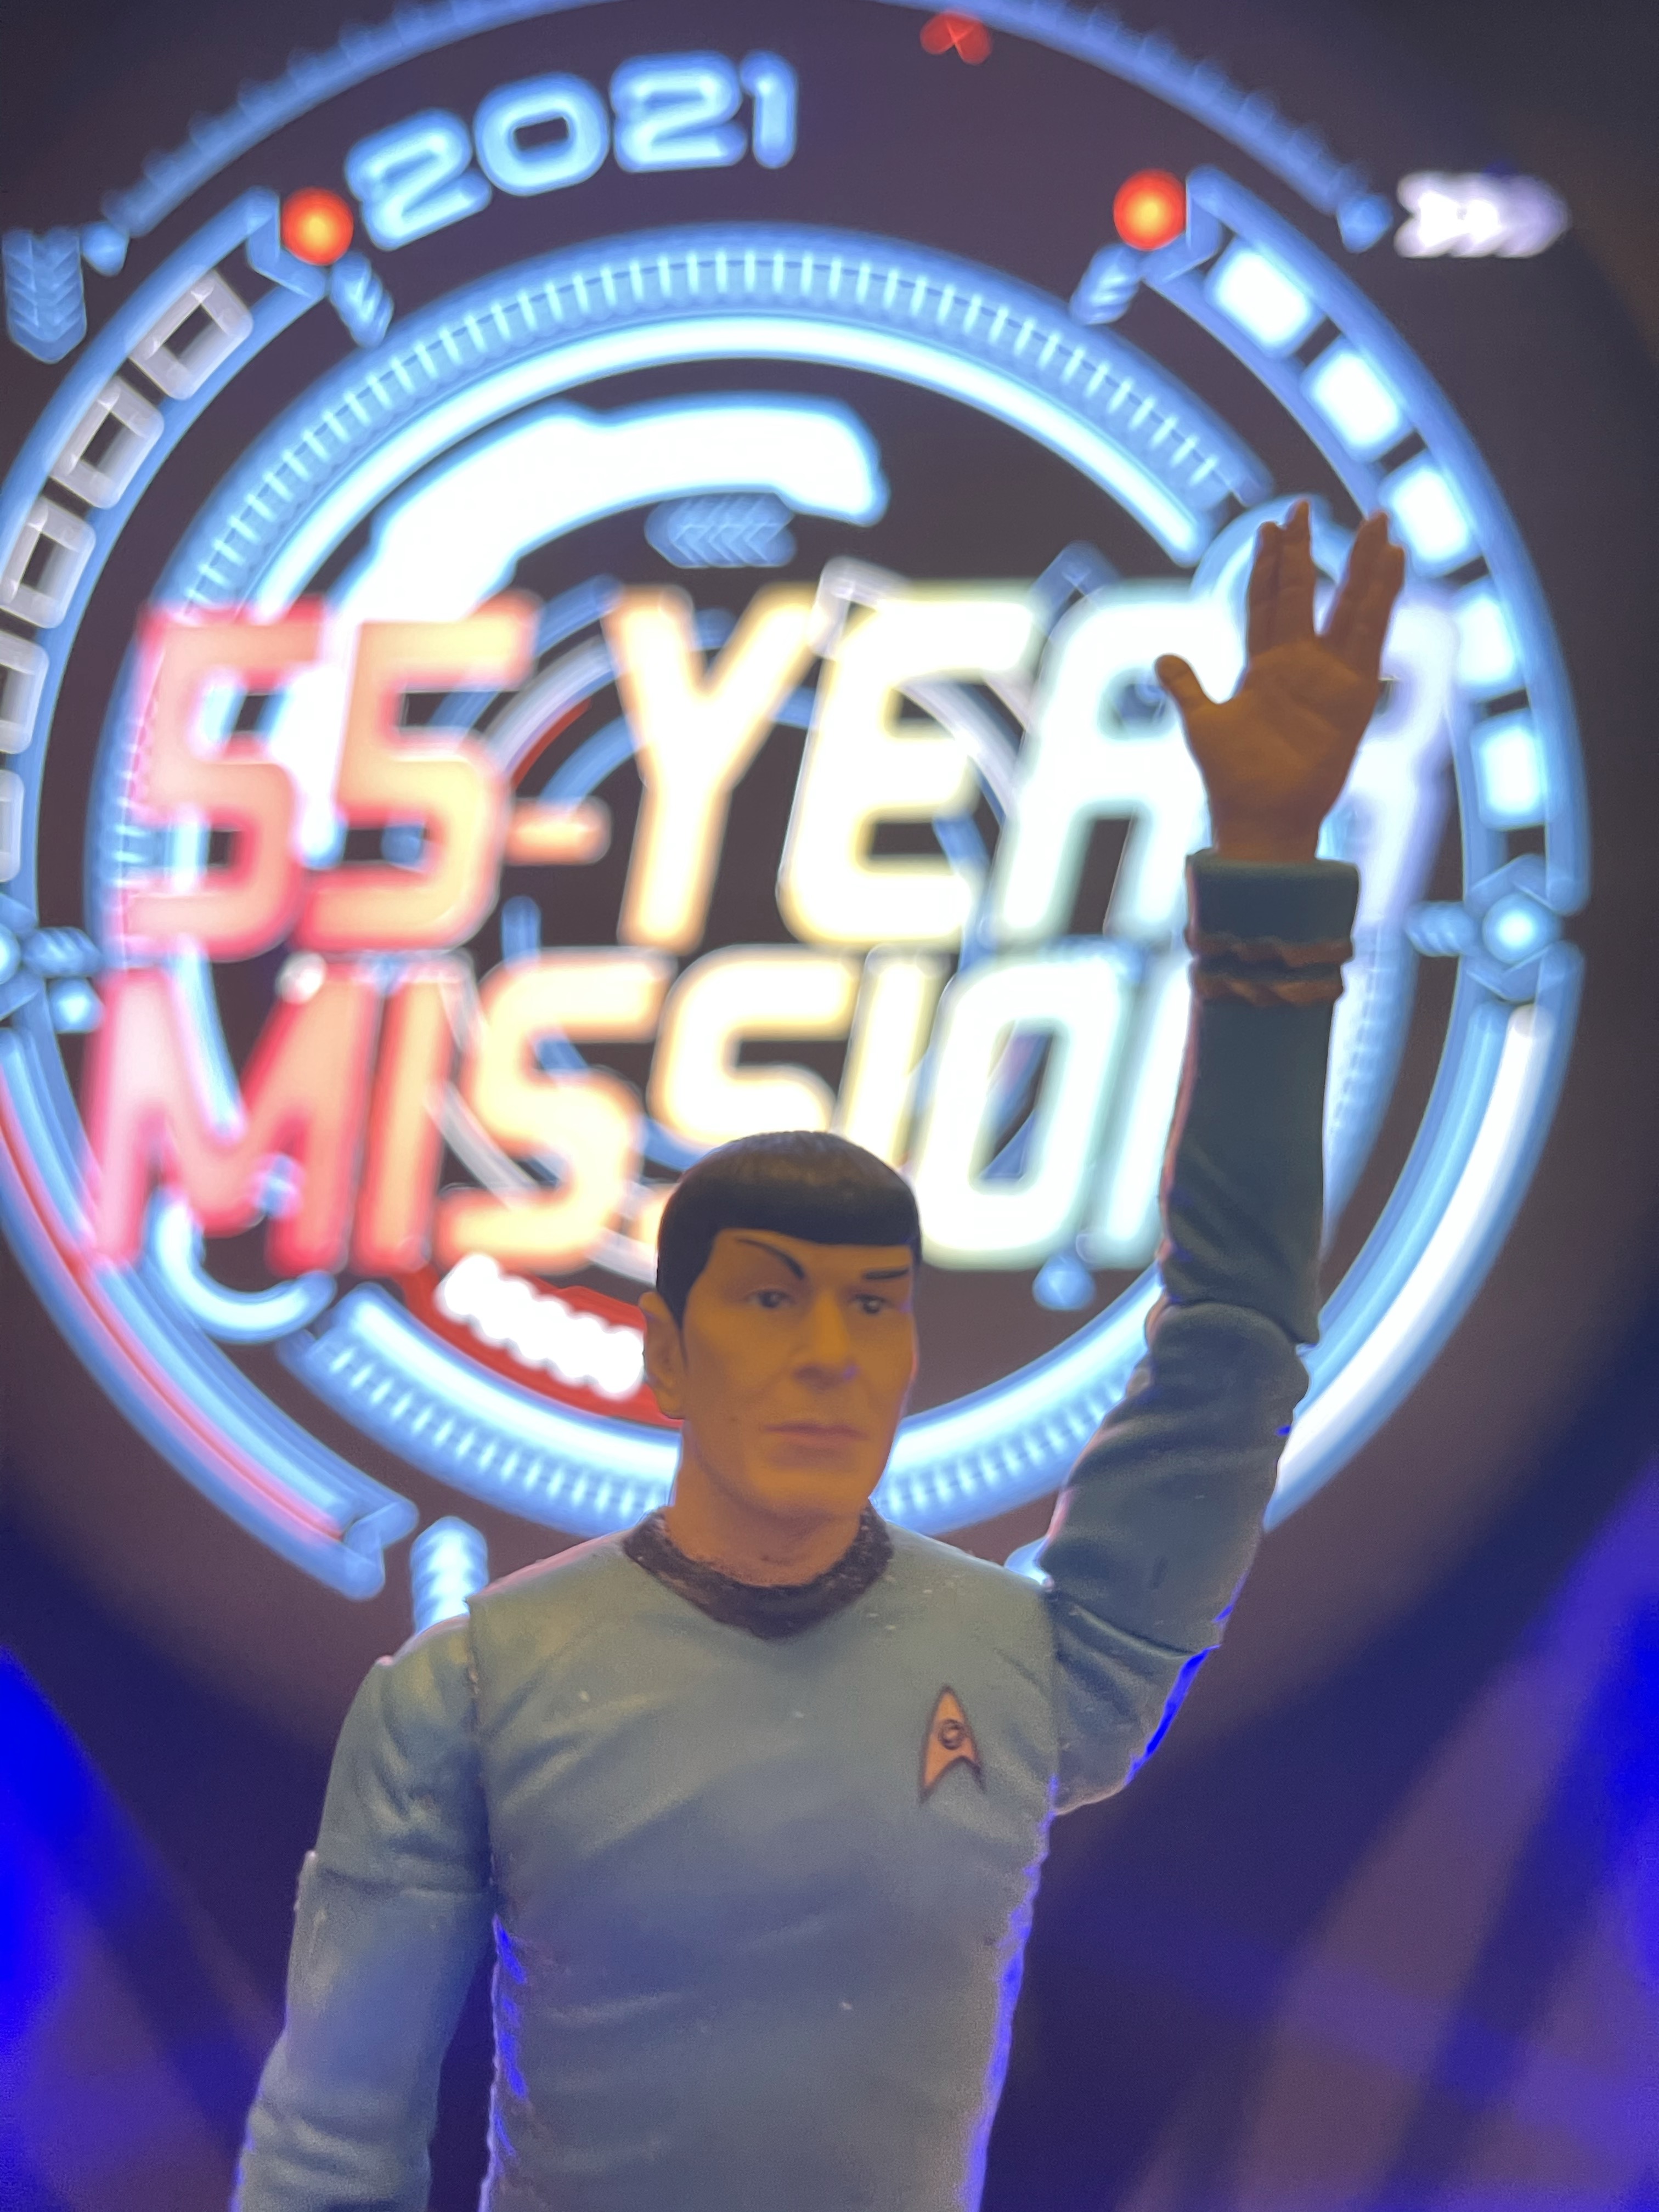 Spock Action Figure at the Las Vegas Convention 2021